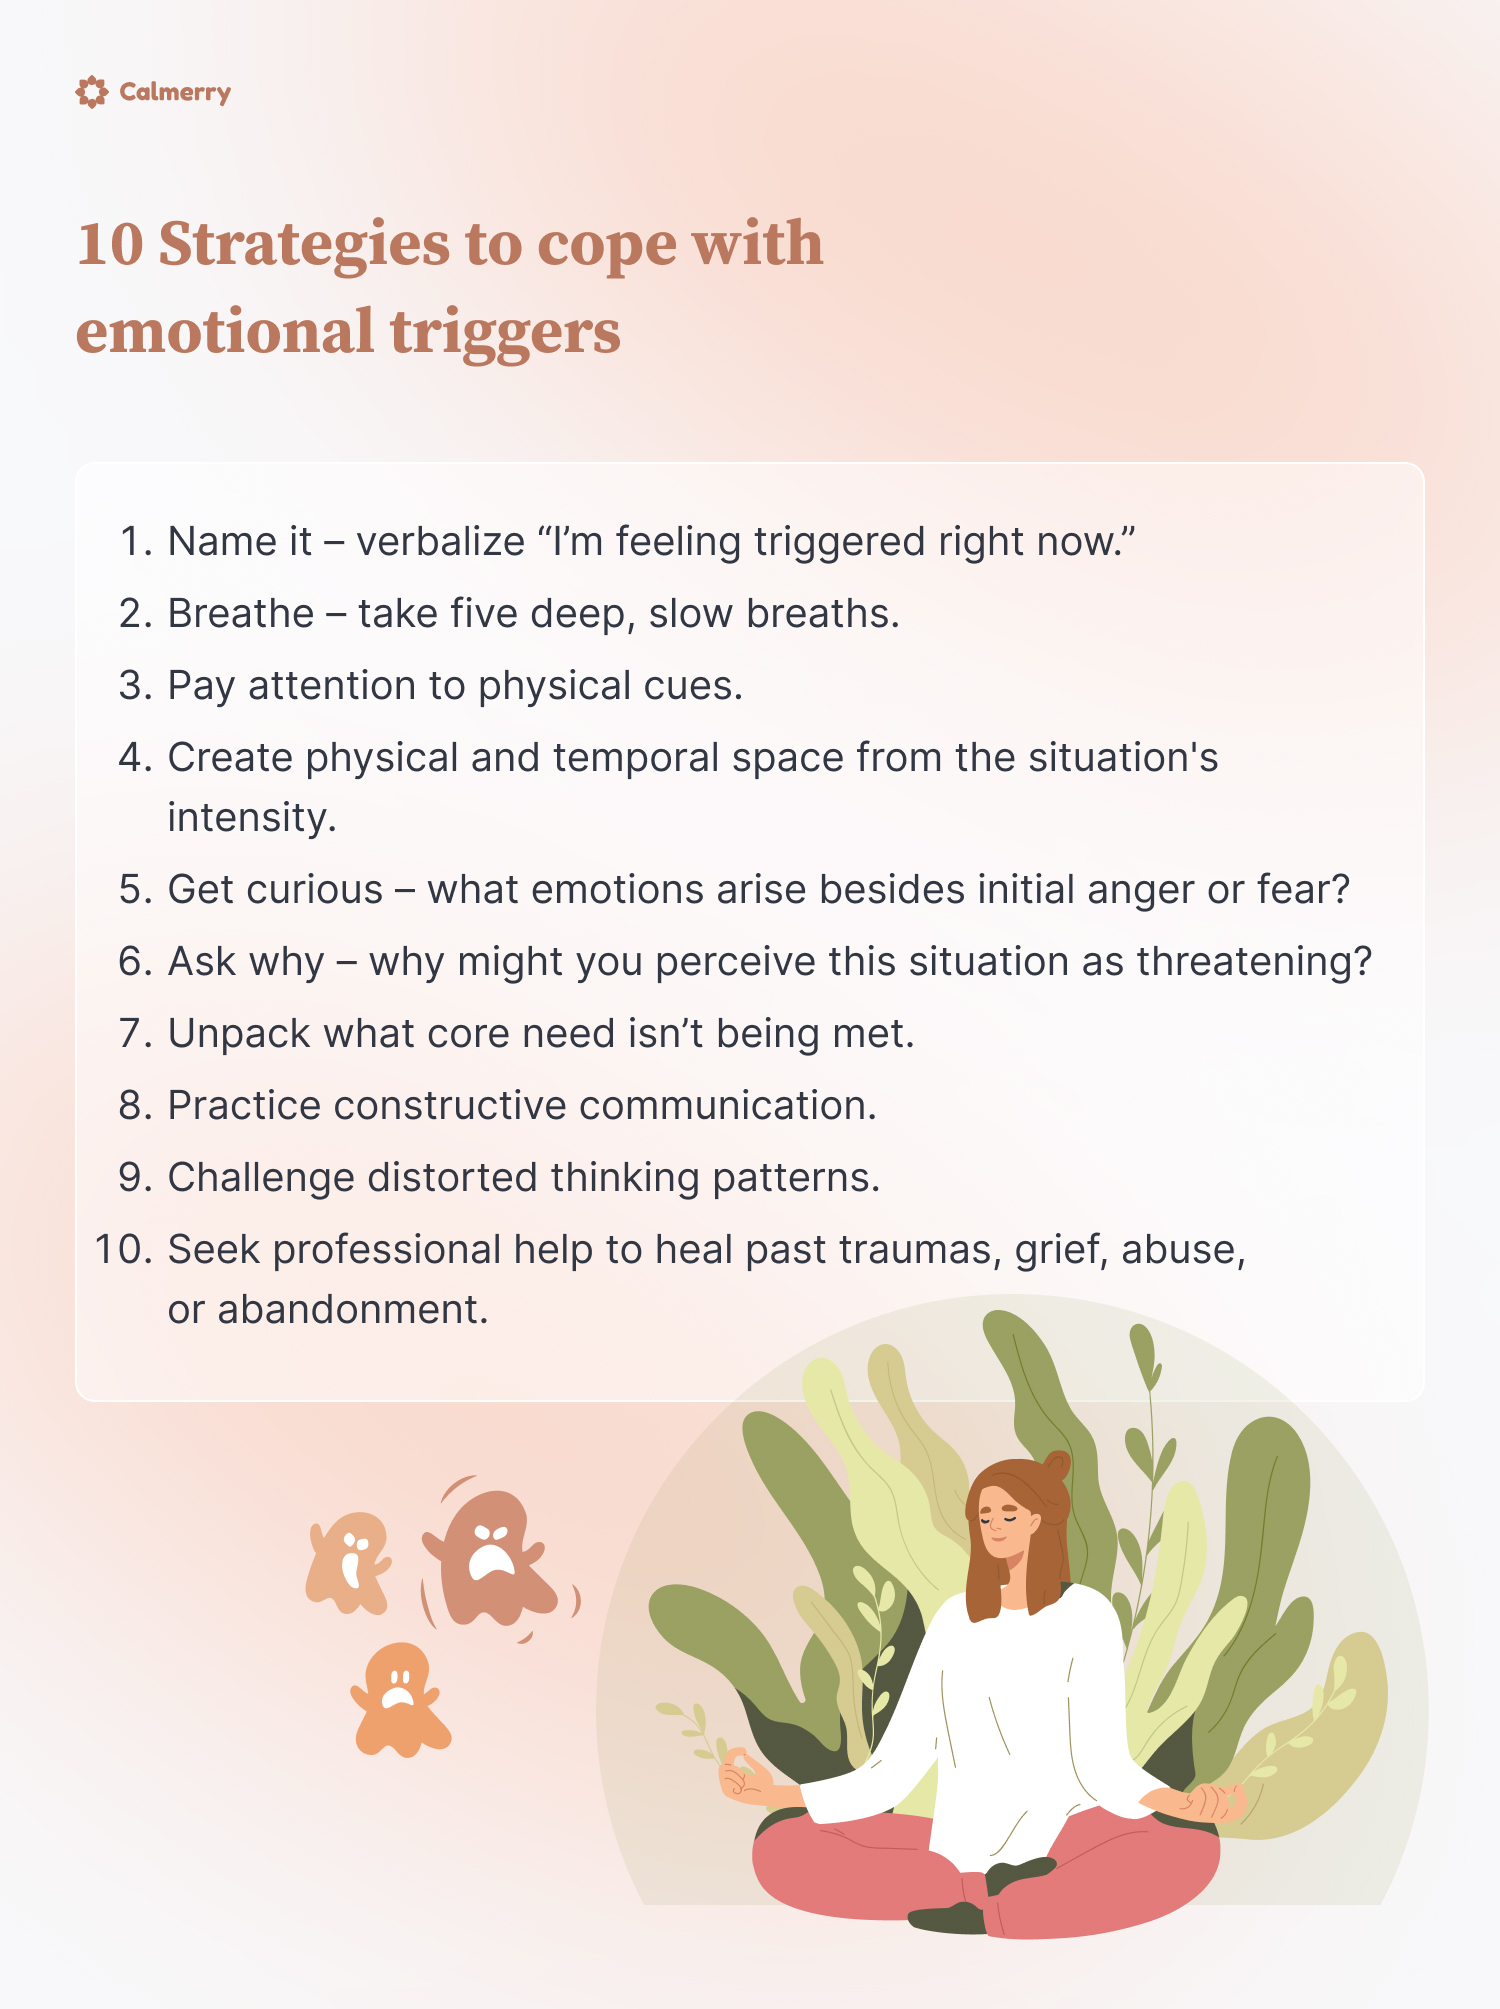 10 Strategies to cope with emotional triggers
Name it – verbalize “I’m feeling triggered right now.”
Breathe – take five deep, slow breaths.
Pay attention to physical cues.
Create physical and temporal space from the situation's intensity.
Get curious – what emotions arise besides initial anger or fear?
Ask why – why might you perceive this situation as threatening?
Unpack what core need isn’t being met.
Practice constructive communication.
Challenge distorted thinking patterns.
Seek professional help to heal past traumas, grief, abuse, or abandonment.